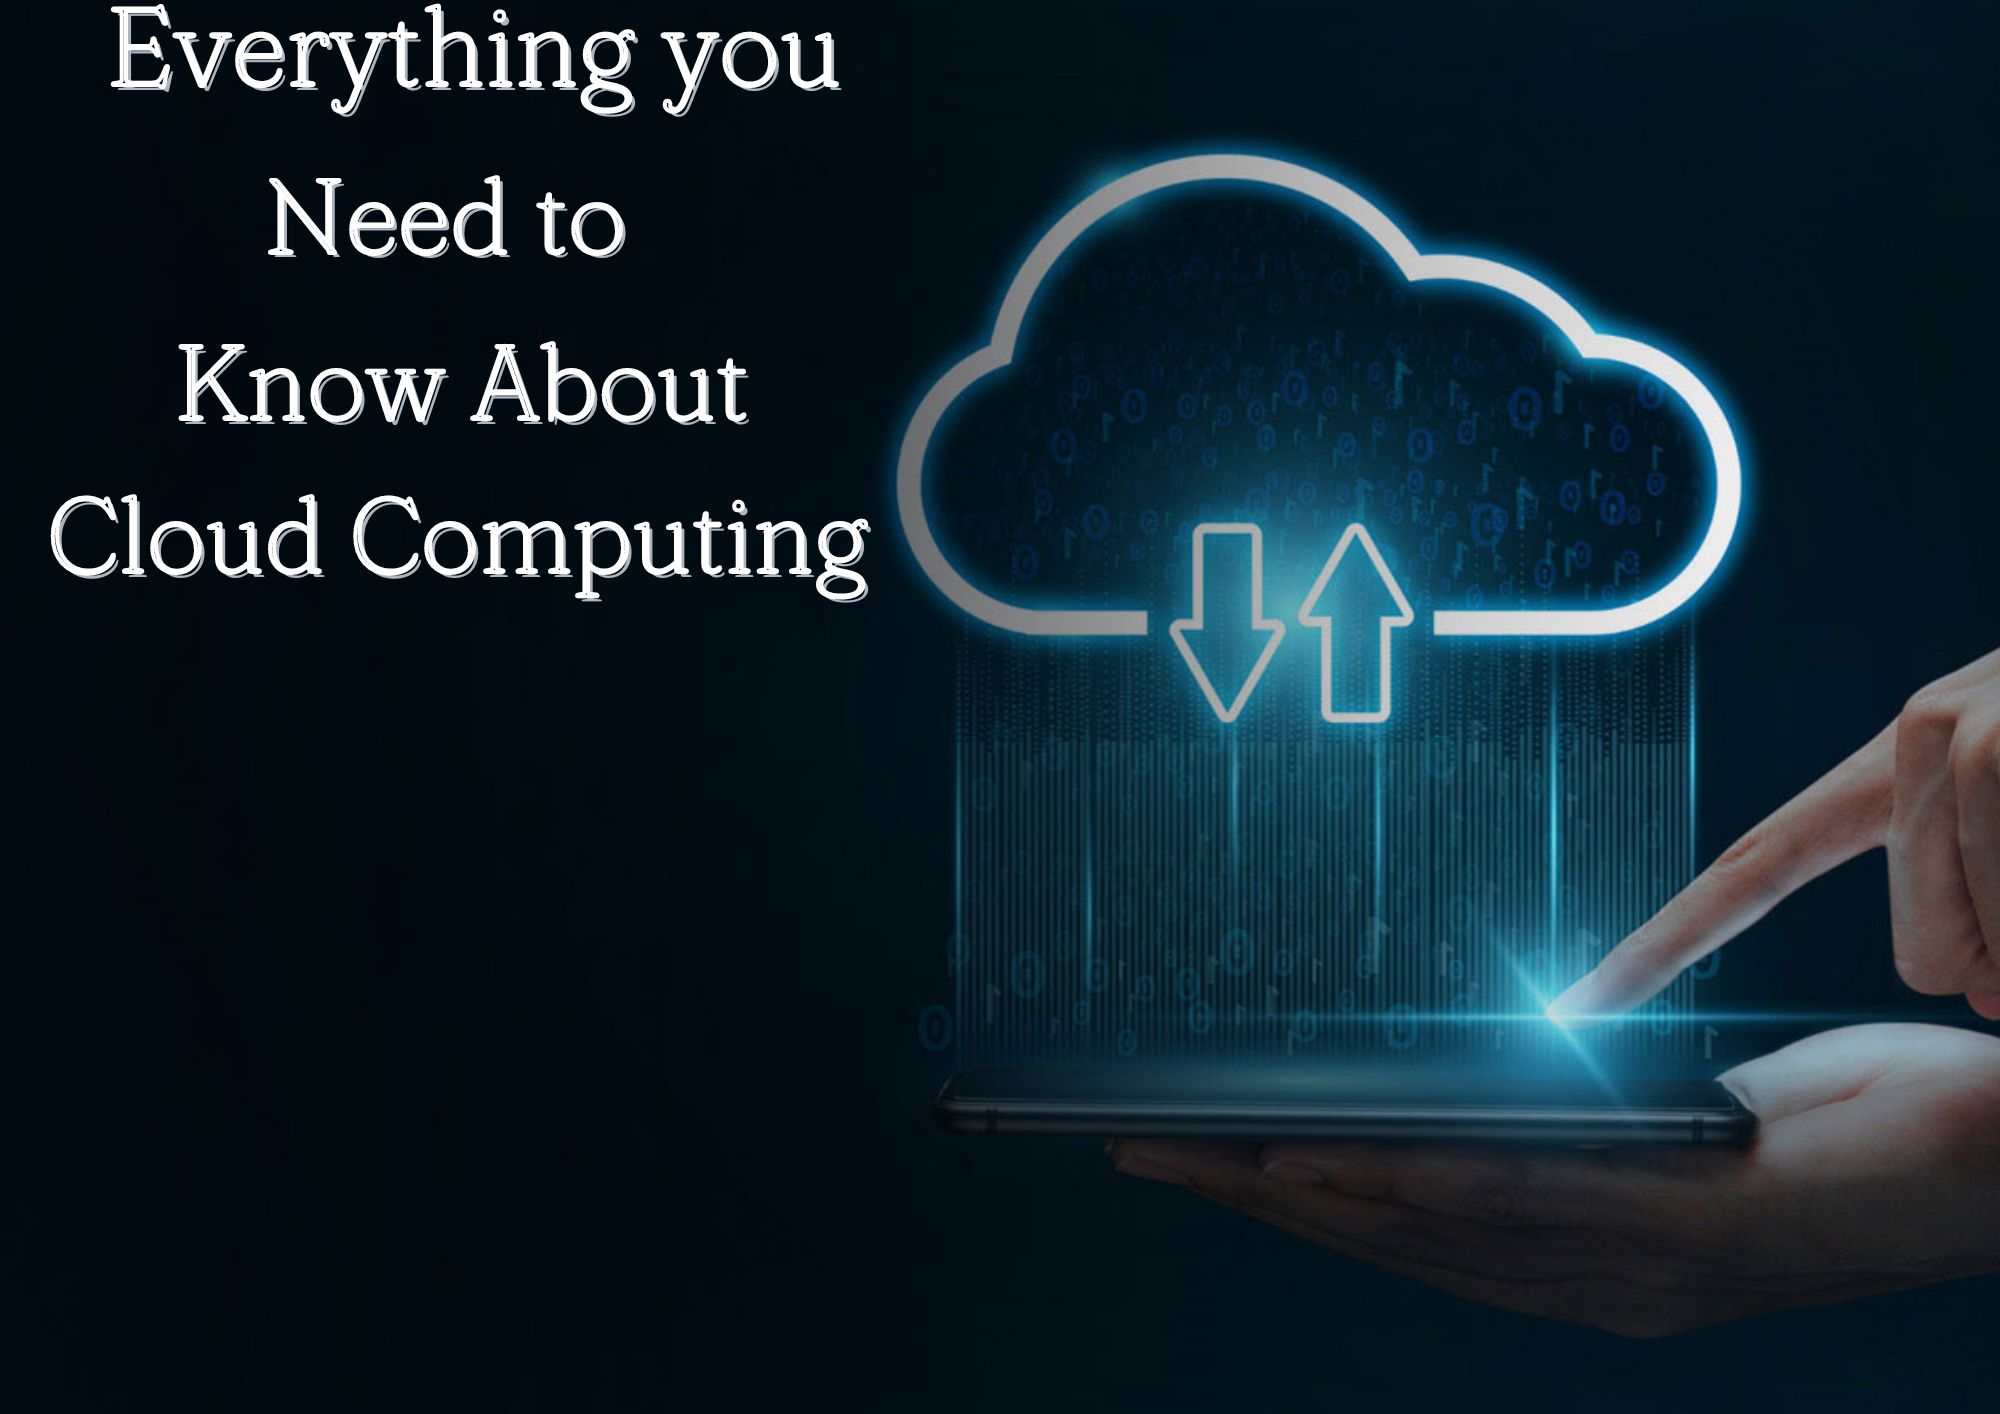 Everything you need to know about cloud computing